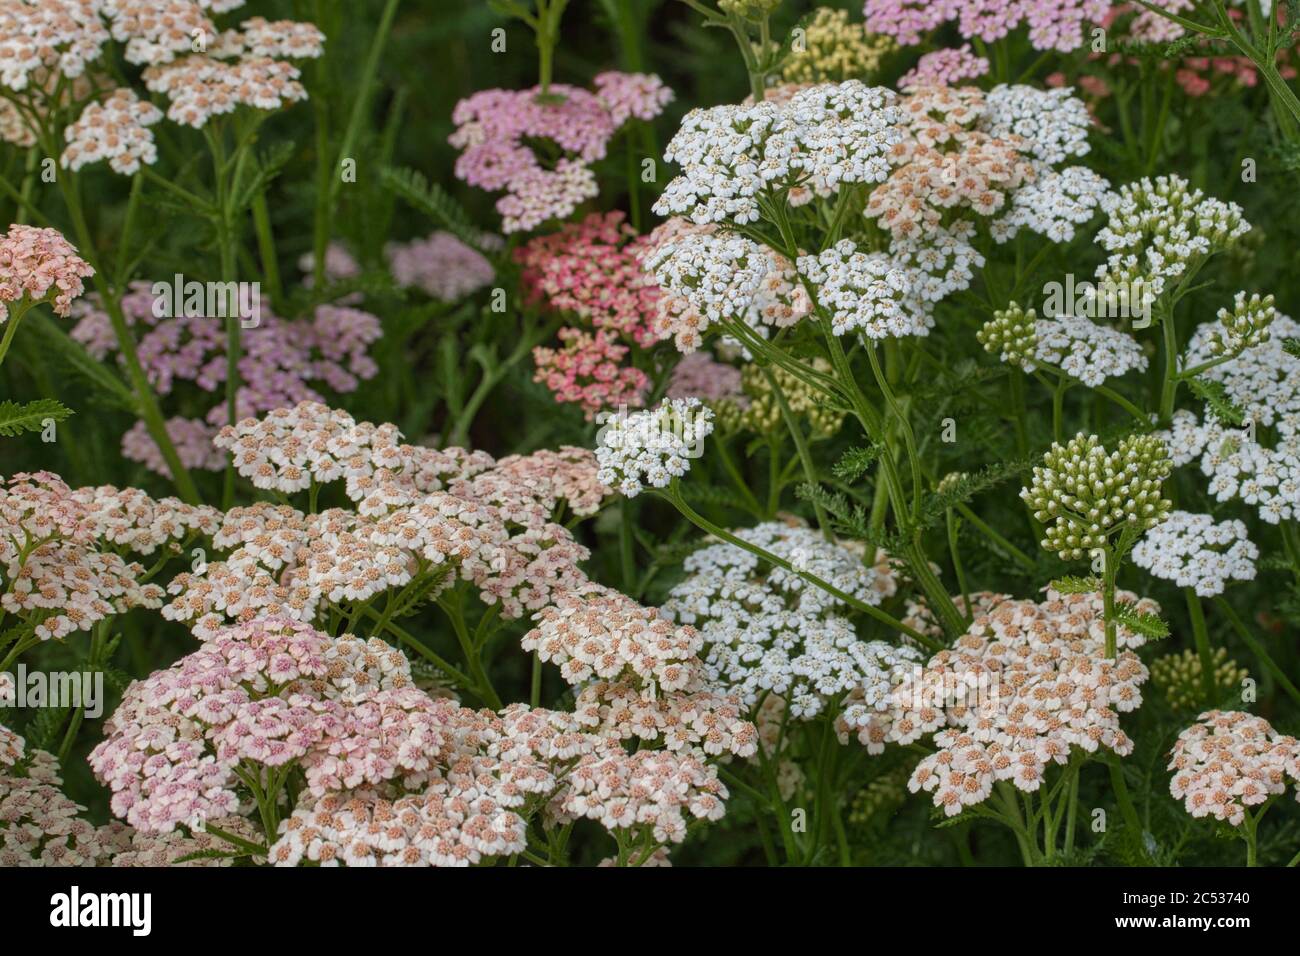 Closeup of pink and white common yarrow flowers Stock Photo - Alamy